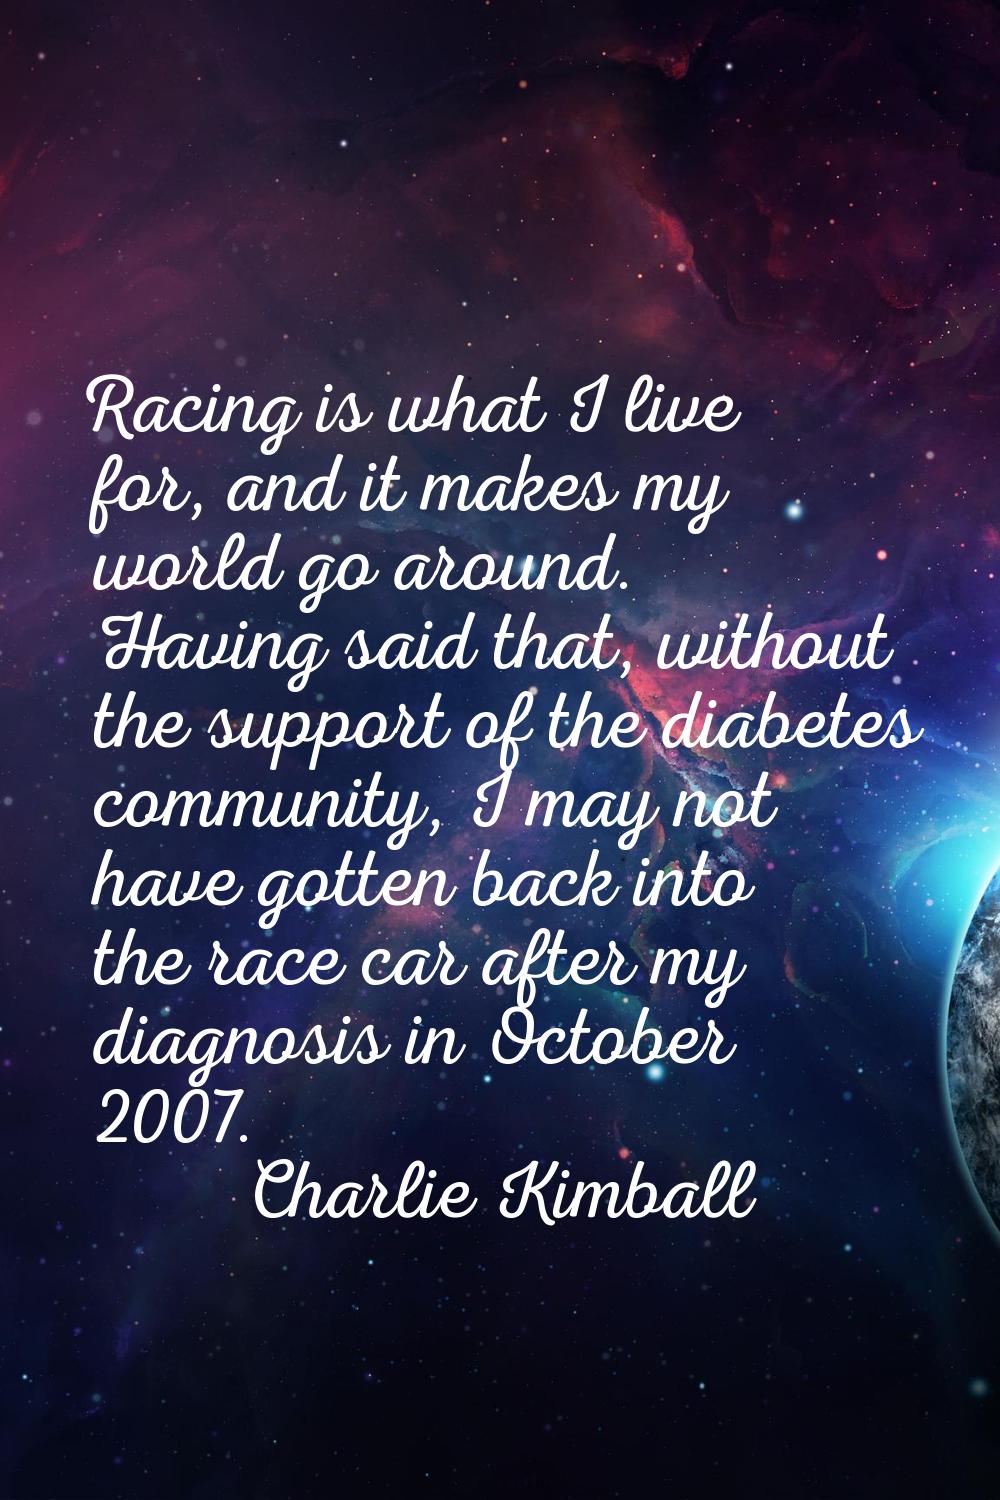 Racing is what I live for, and it makes my world go around. Having said that, without the support o